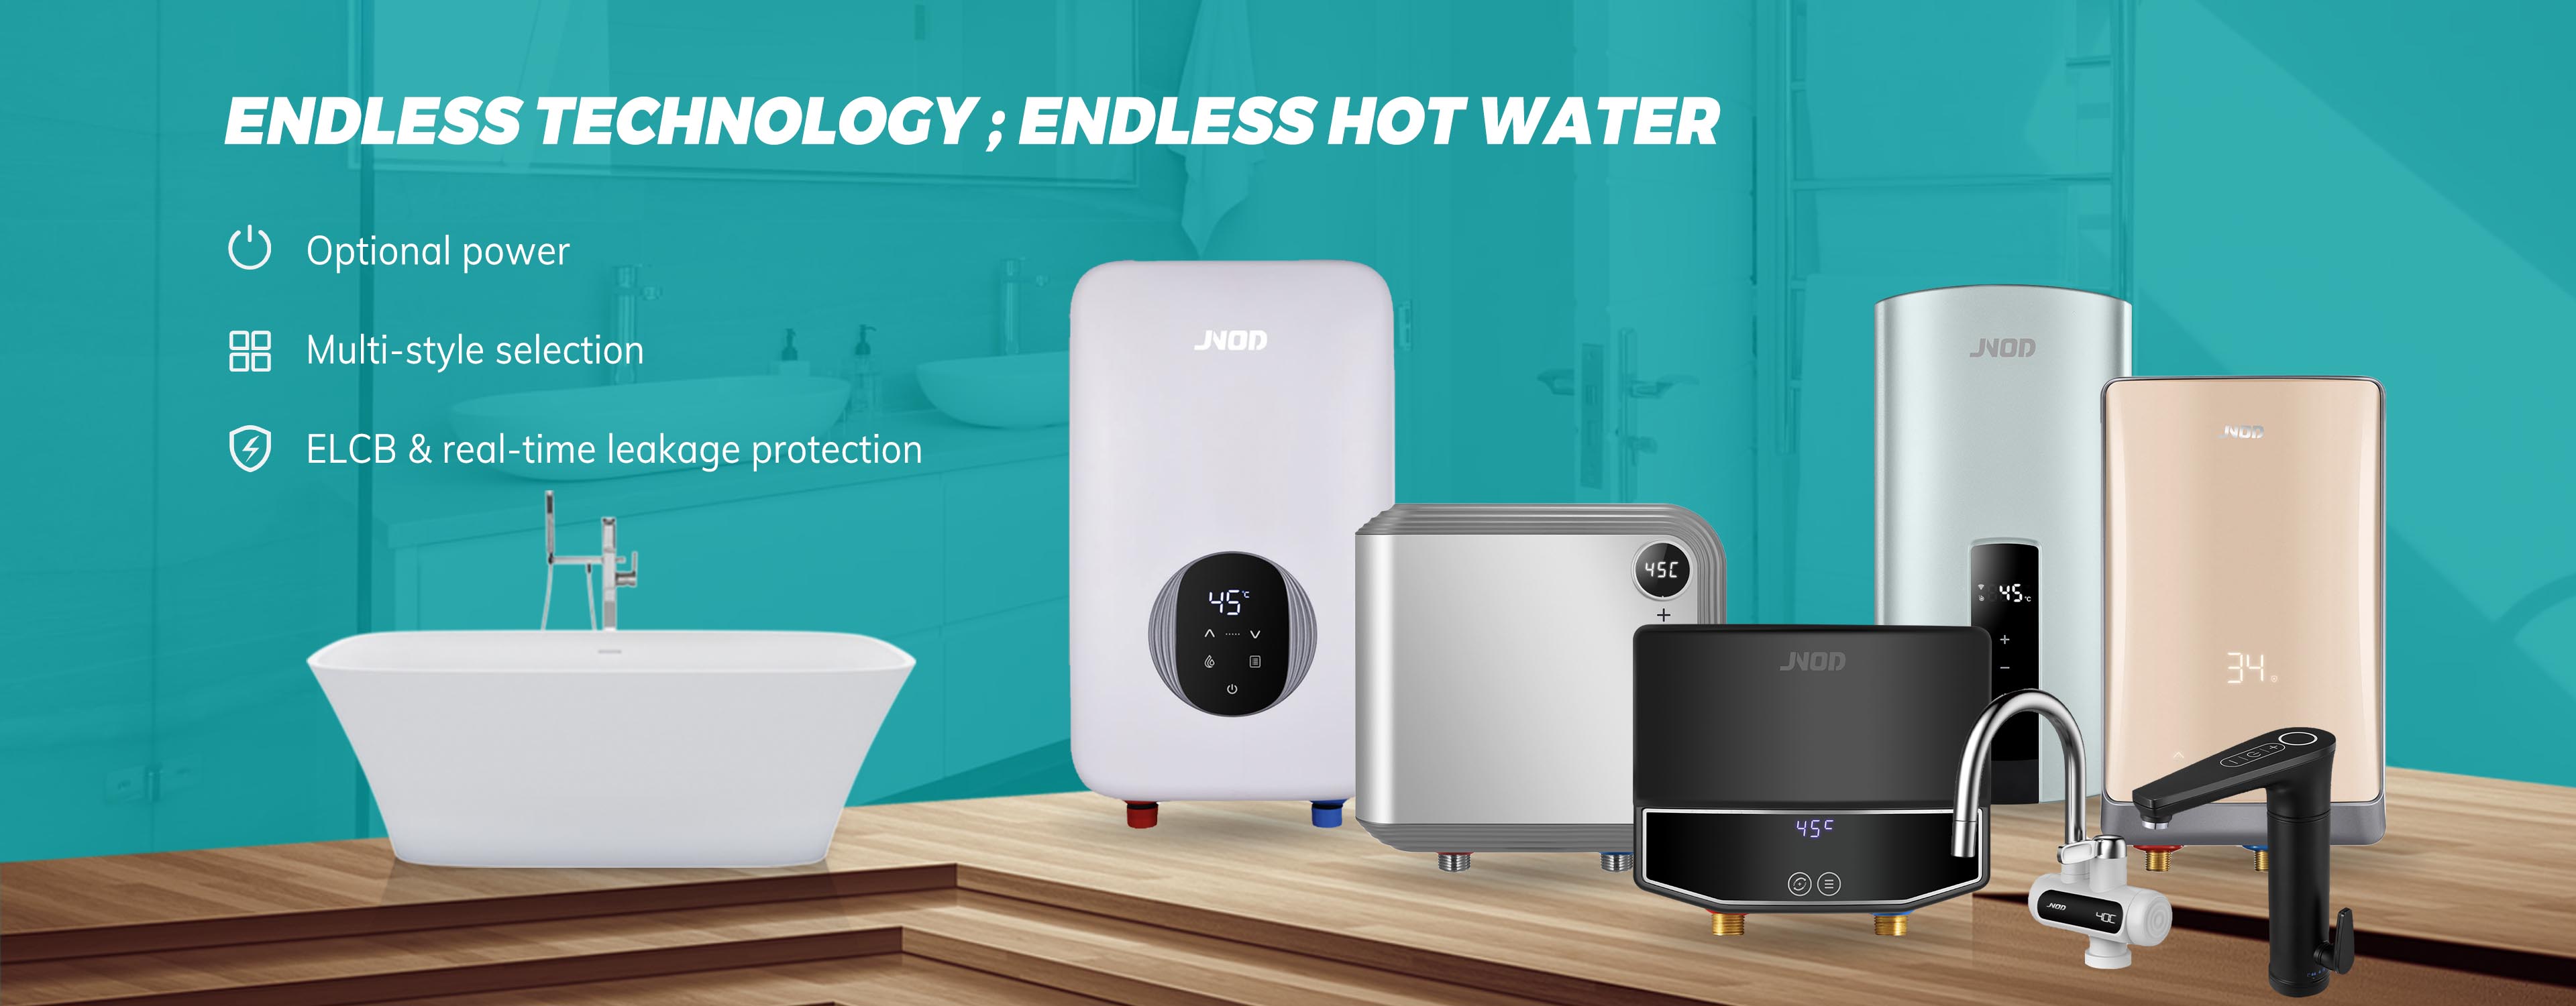 portable hot water heater